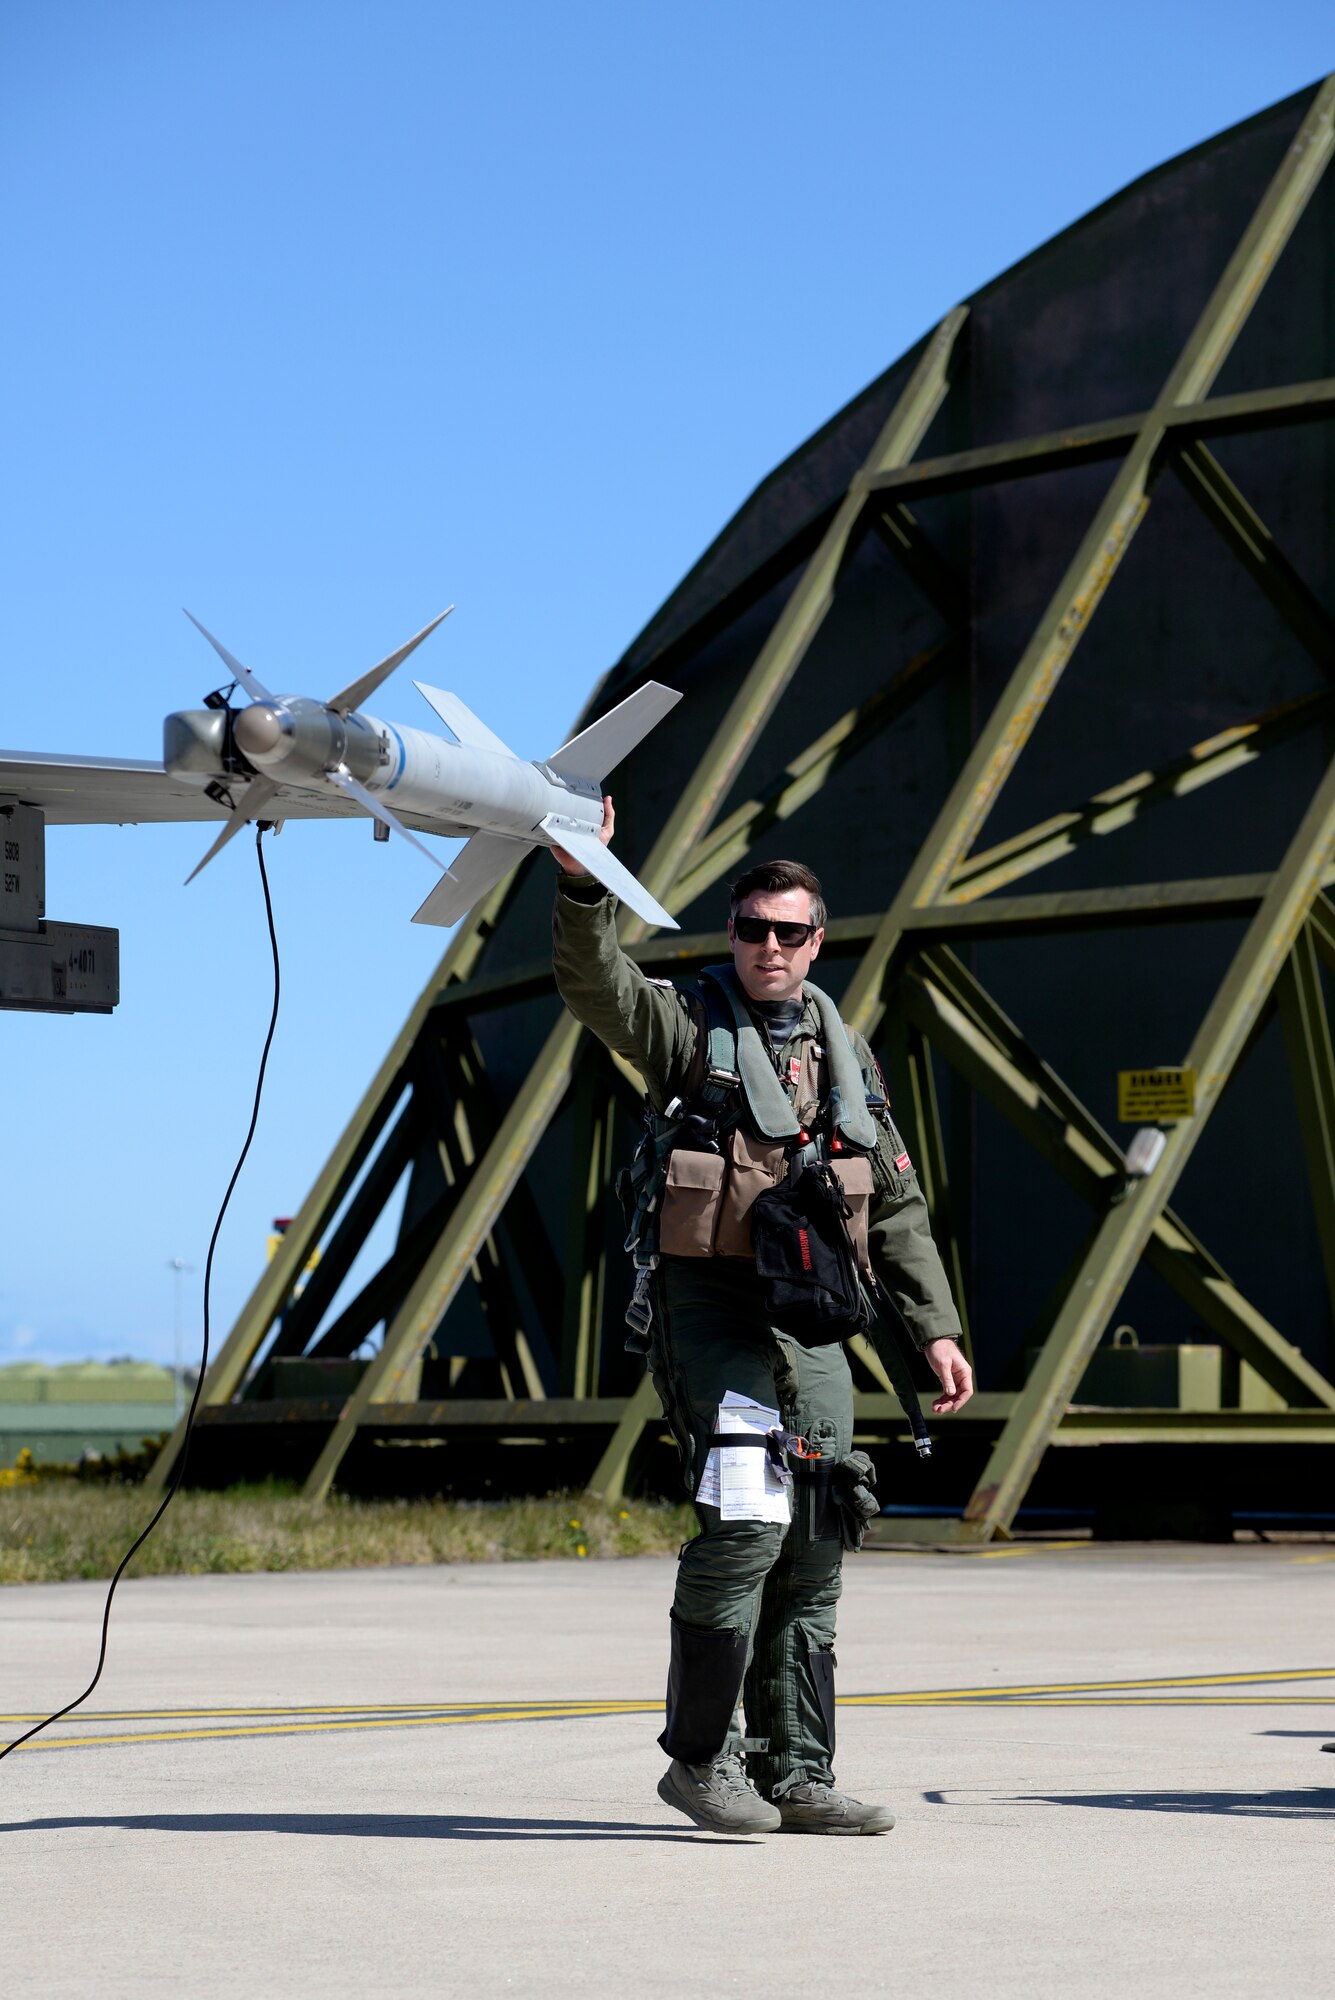 U.S. Air Force Maj. Kevin Bunten, 480th Fighter Squadron Assistant Director of Operations, conducts a pre-flight inspection of his F-16 Fighting Falcon before flying a low-level training sortie at RAF Lossiemouth, Scotland, May 7, 2019, during exercise Formidable Shield. Formidable Shield is a U.S.-led exercise, conducted by Naval Striking and Support Forces NATO. The purpose of the training is to improve allied interoperability in a live-fire integrated air and missile defense exercise. (U.S. Air Force photo by Master Sgt. Austin M. May)